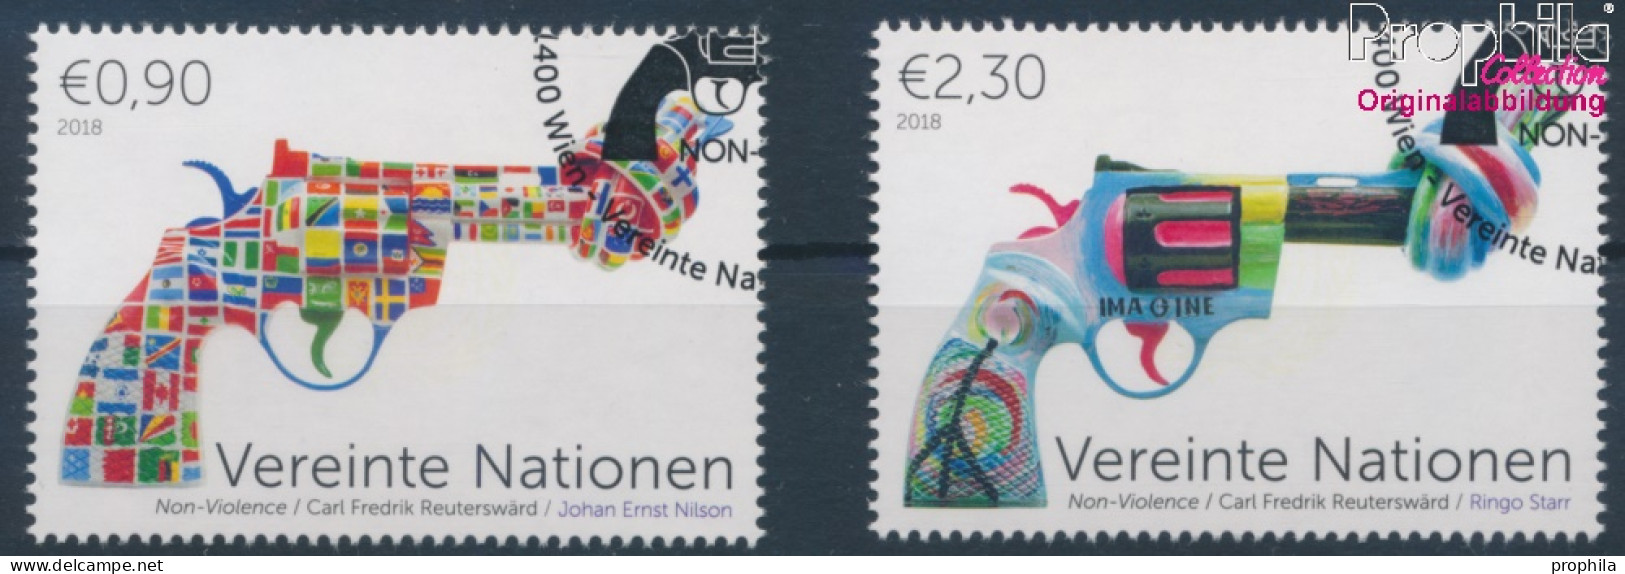 UNO - Wien 1041-1042 (kompl.Ausg.) Gestempelt 2018 Non Violence Project (10216418 - Used Stamps